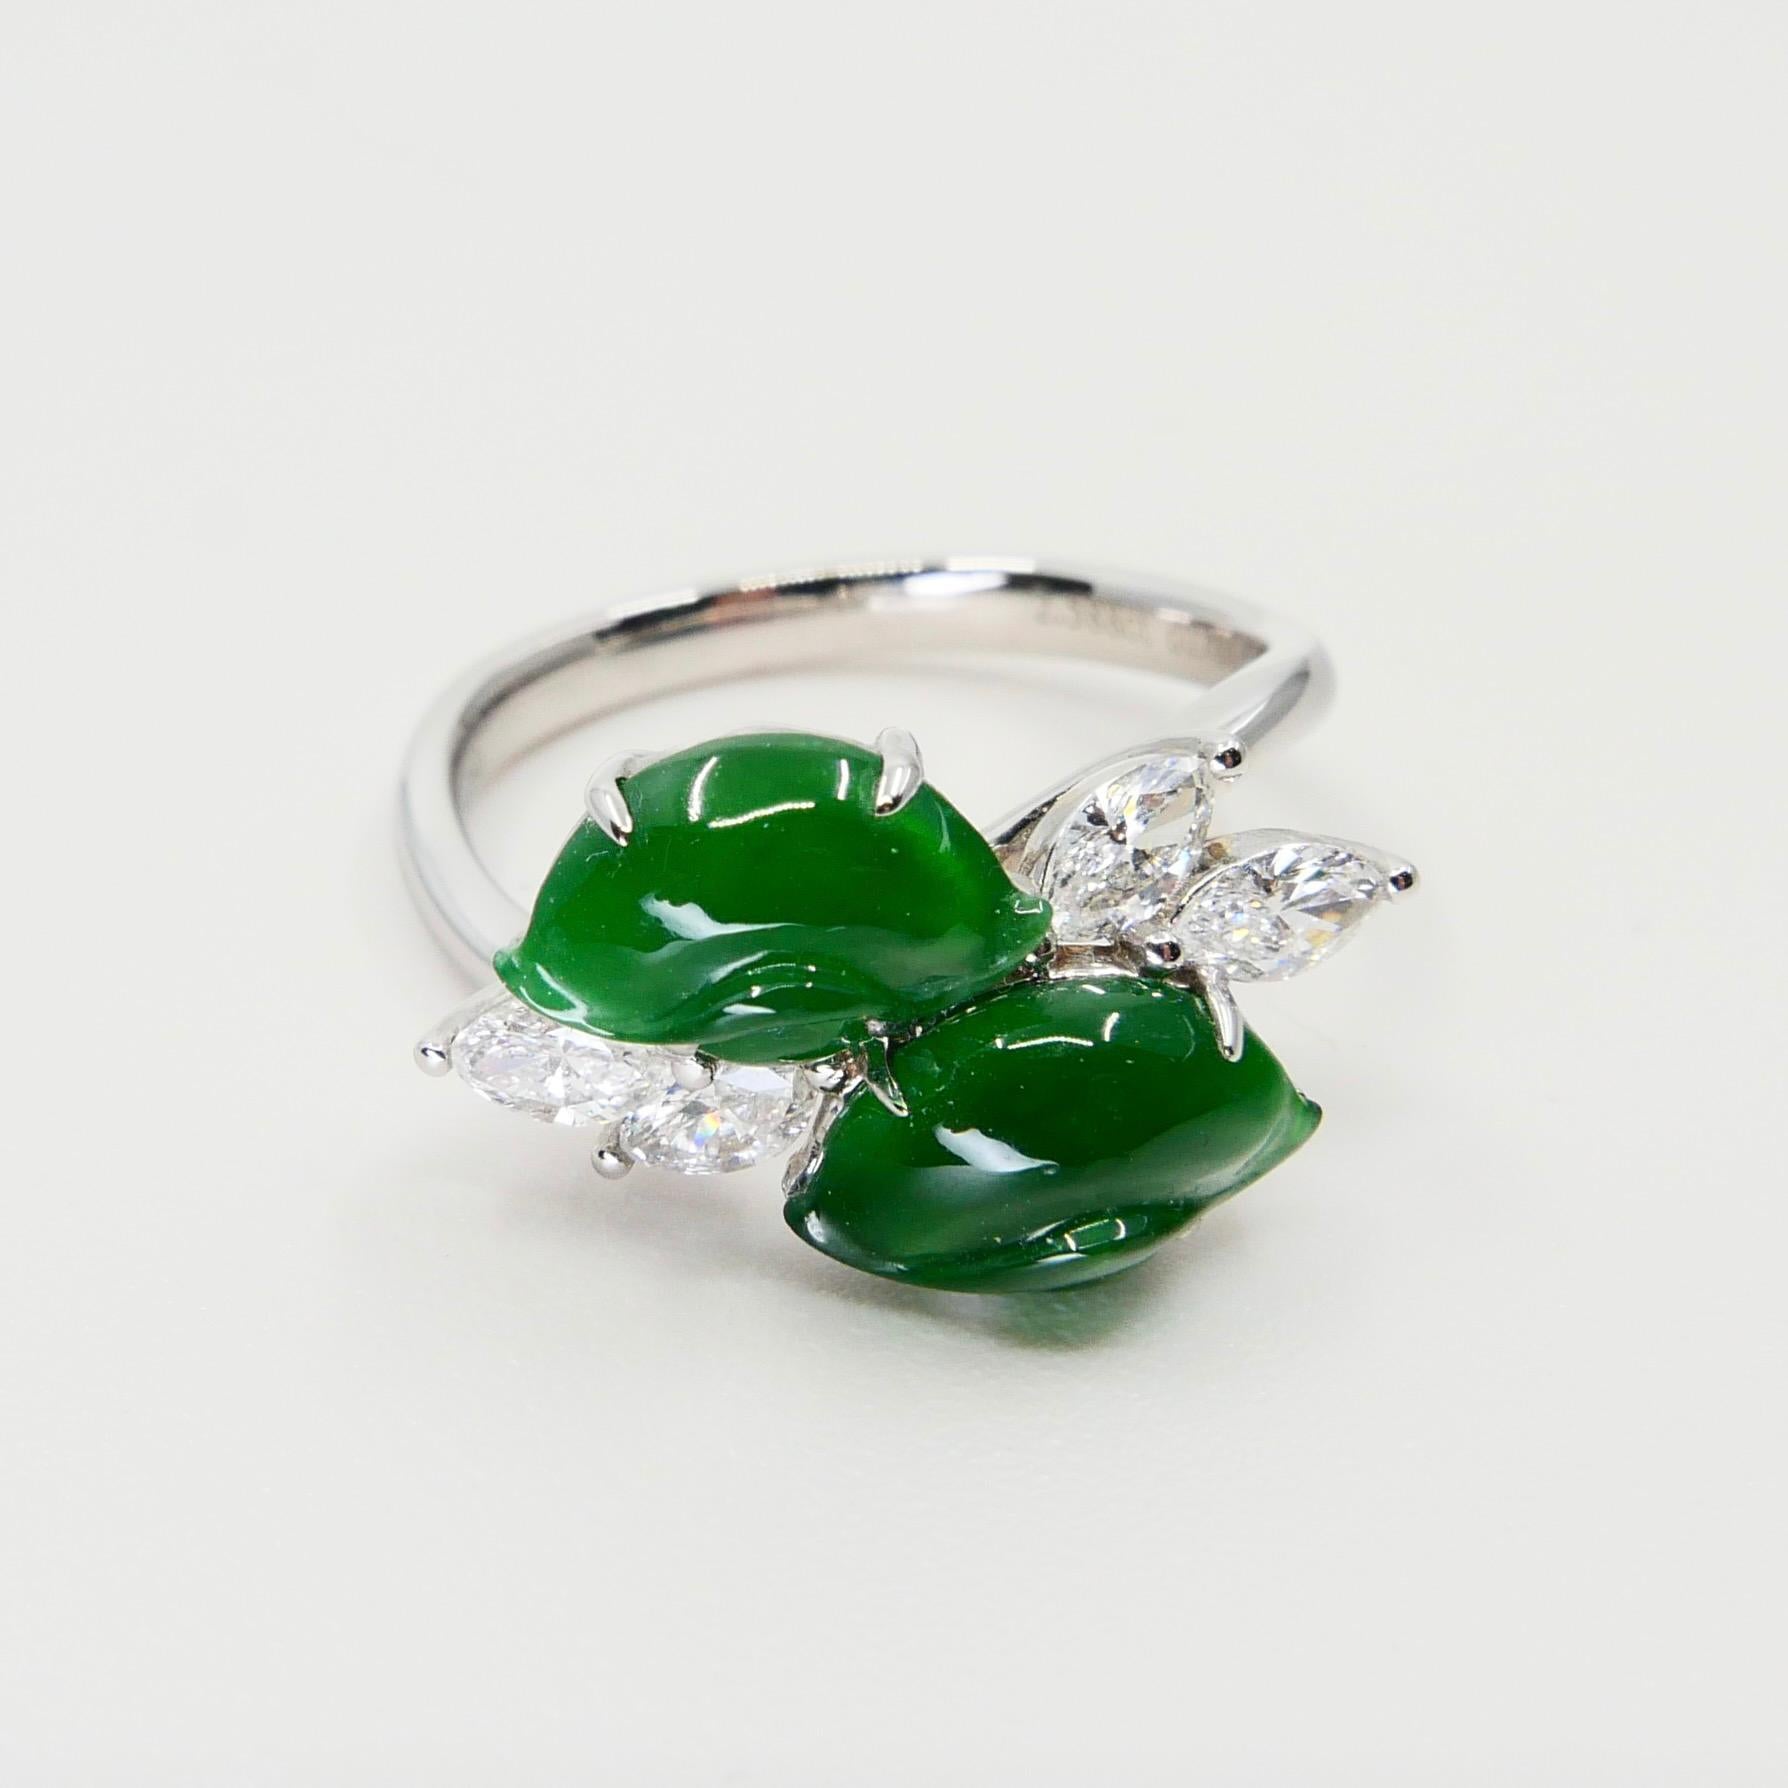 Certified Type A Jadeite Jade Ingot & Diamond Cocktail Ring, Imperial Green For Sale 1